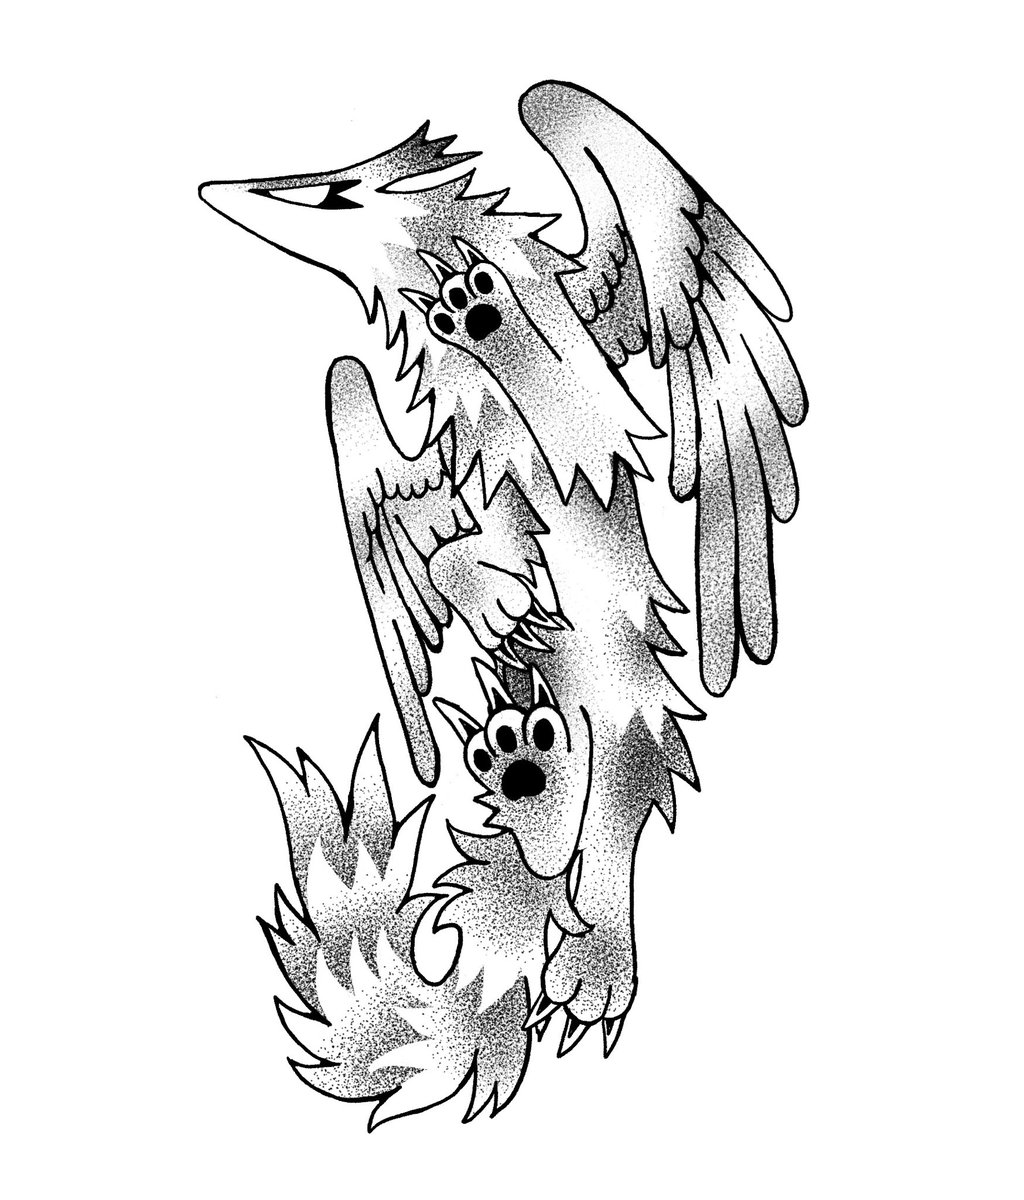 looking to take some custom tattoo design cms, can be done by another artist or saved for a future appointment with me. here’s one i did for a patron to fit a particular spot 🐺 roughly💲1️⃣2️⃣0️⃣ but open to budgets + ideas.